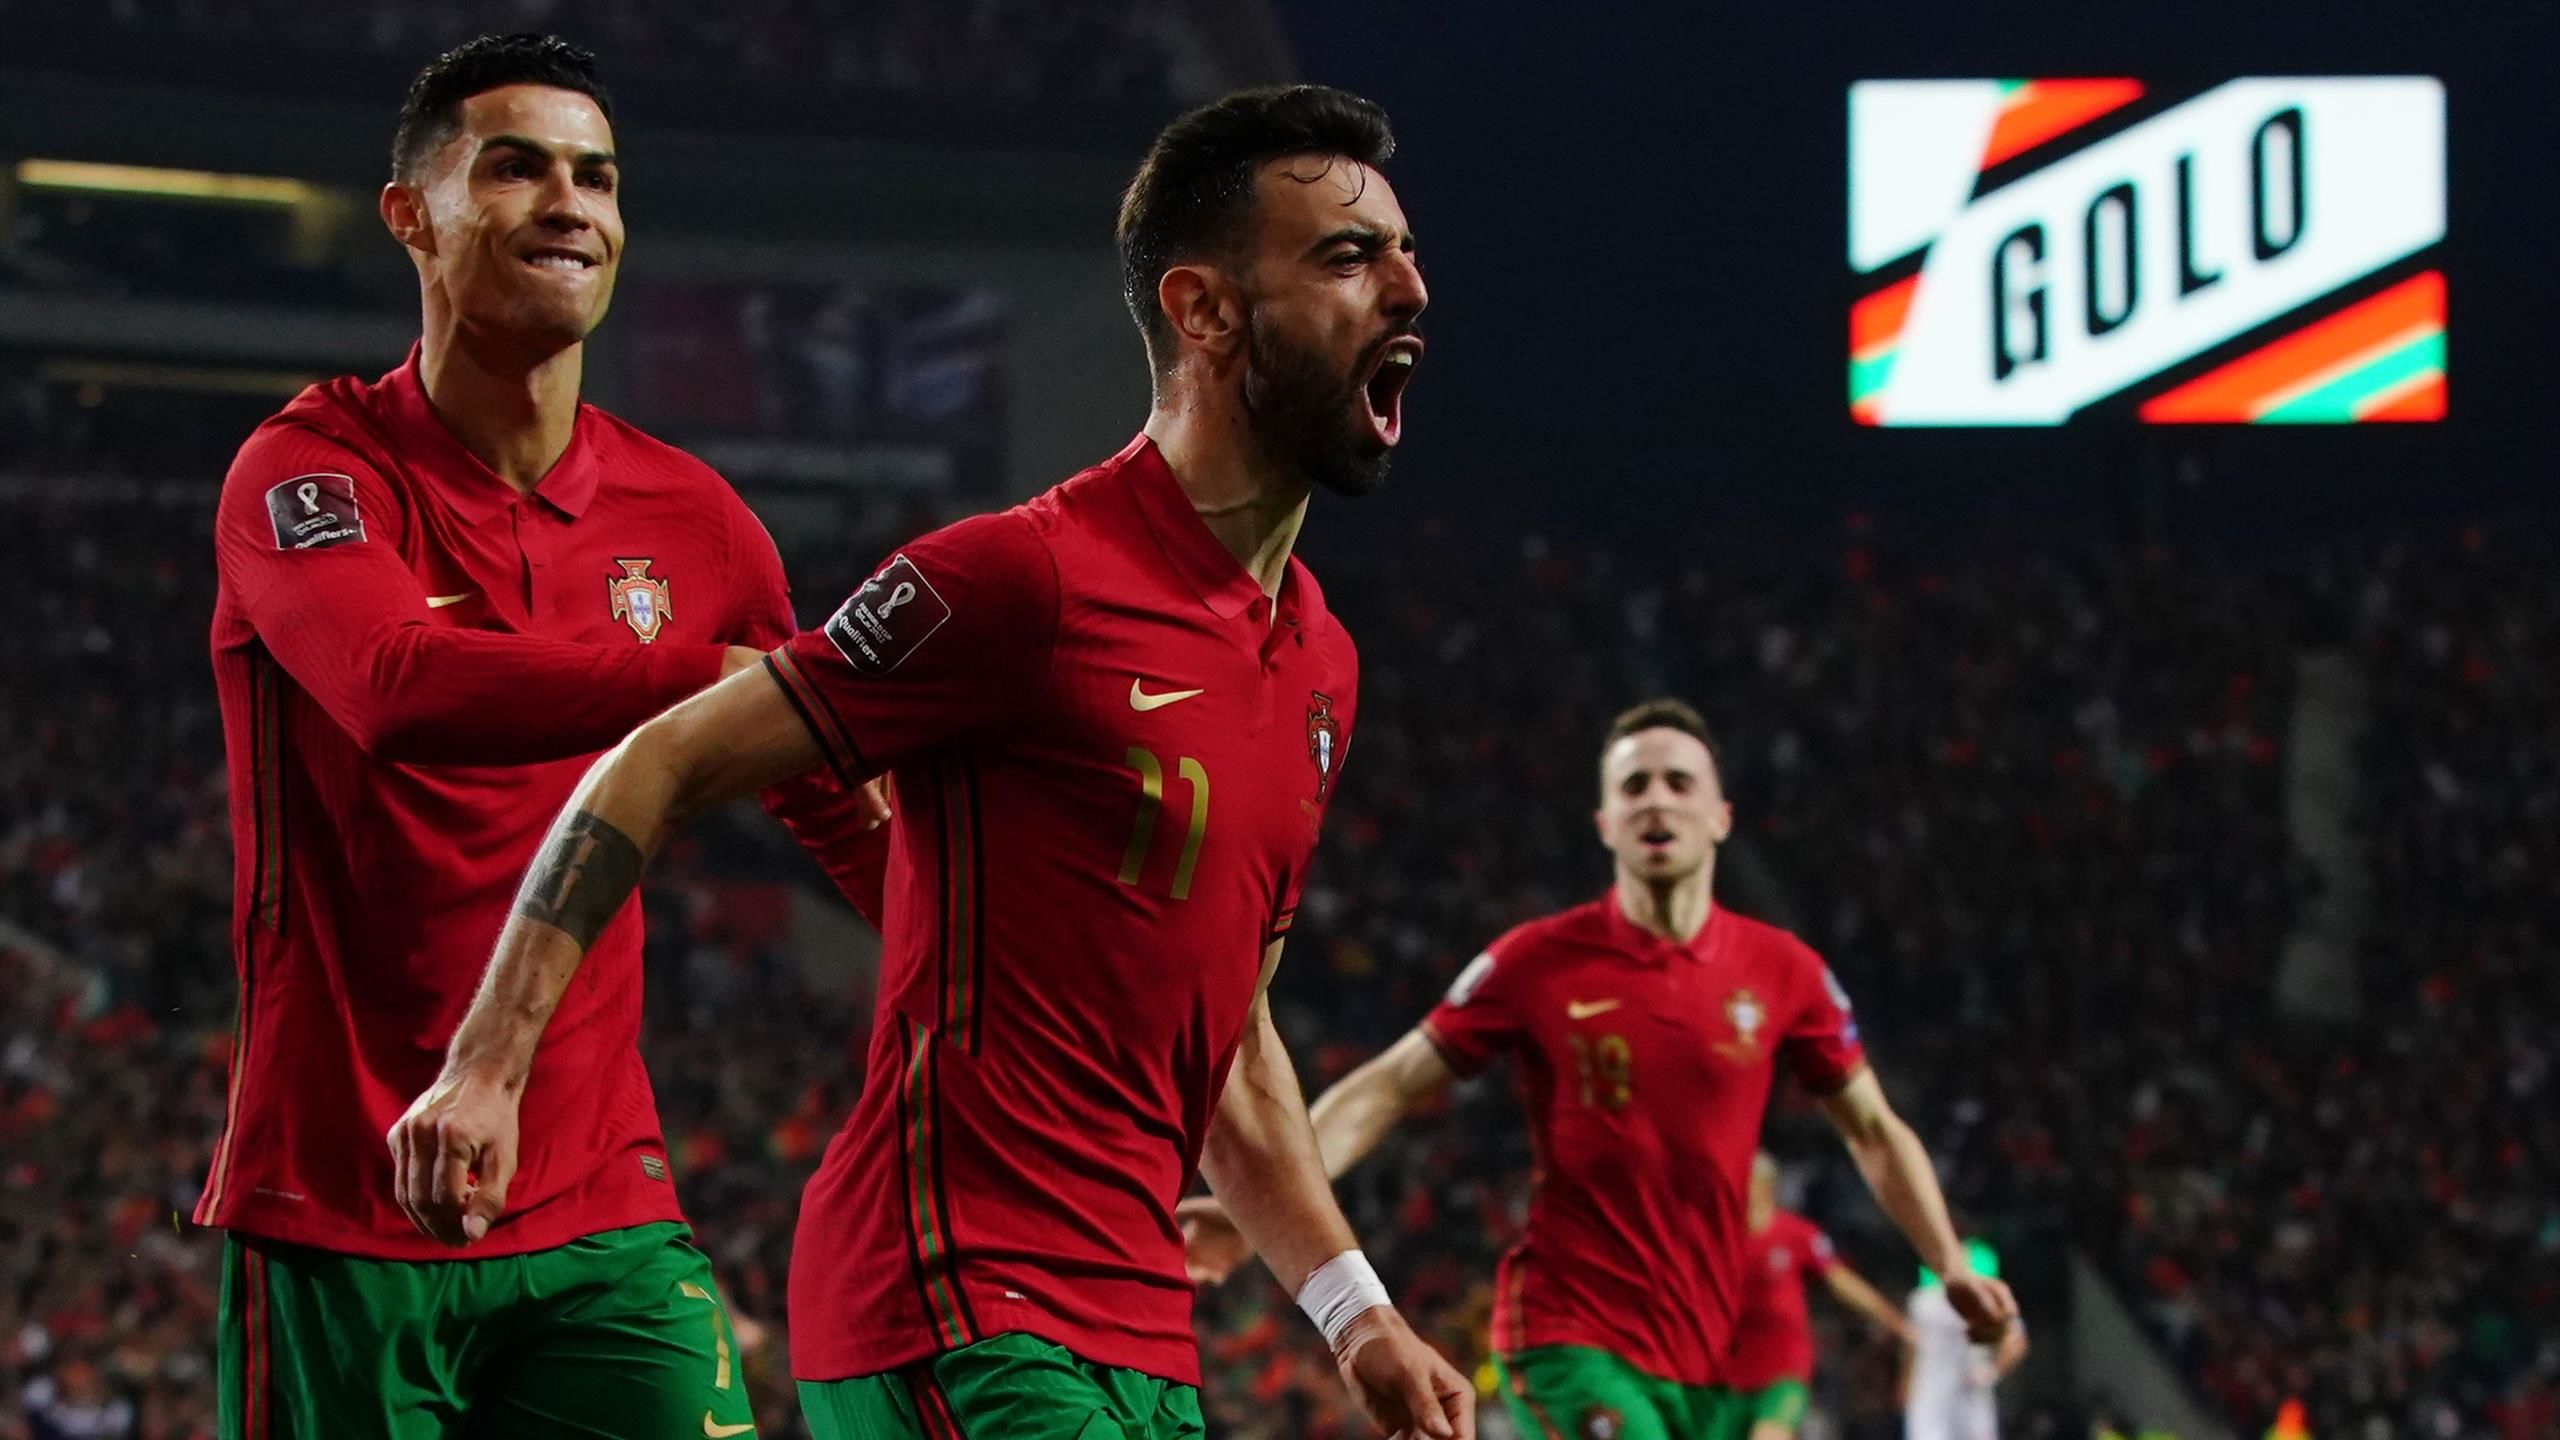 Portugal at the Qatar World Cup 2022 Group, Schedule of Matches, Star players, Roster, and Coach